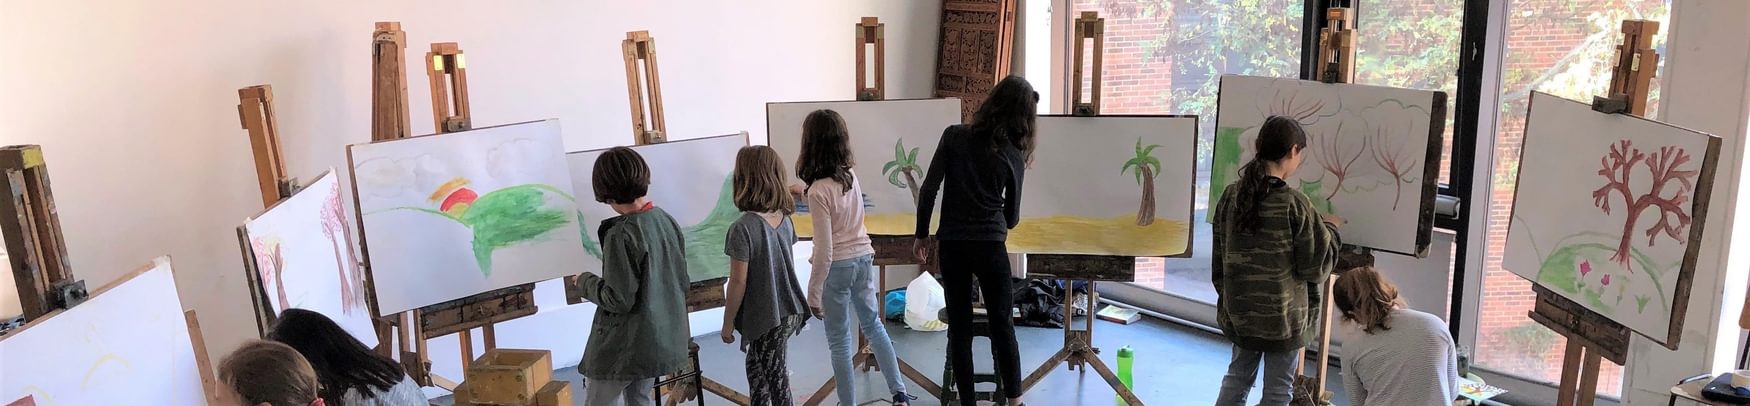 Childrens Painting and drawing on easels 2022